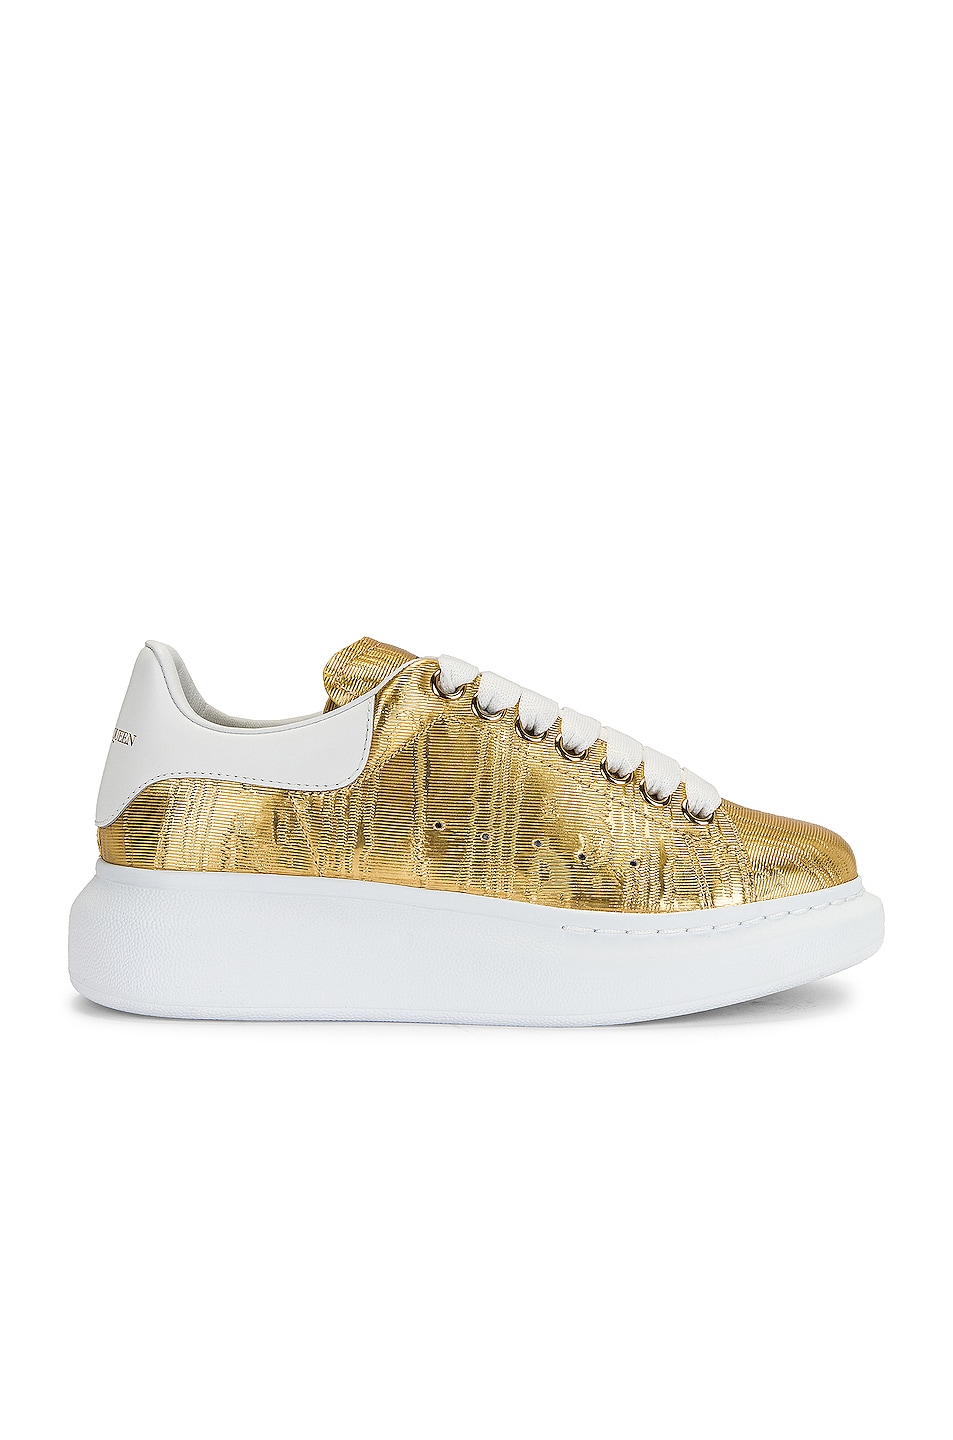 Image 1 of Alexander McQueen Lacquered Sneakers in Gold & White